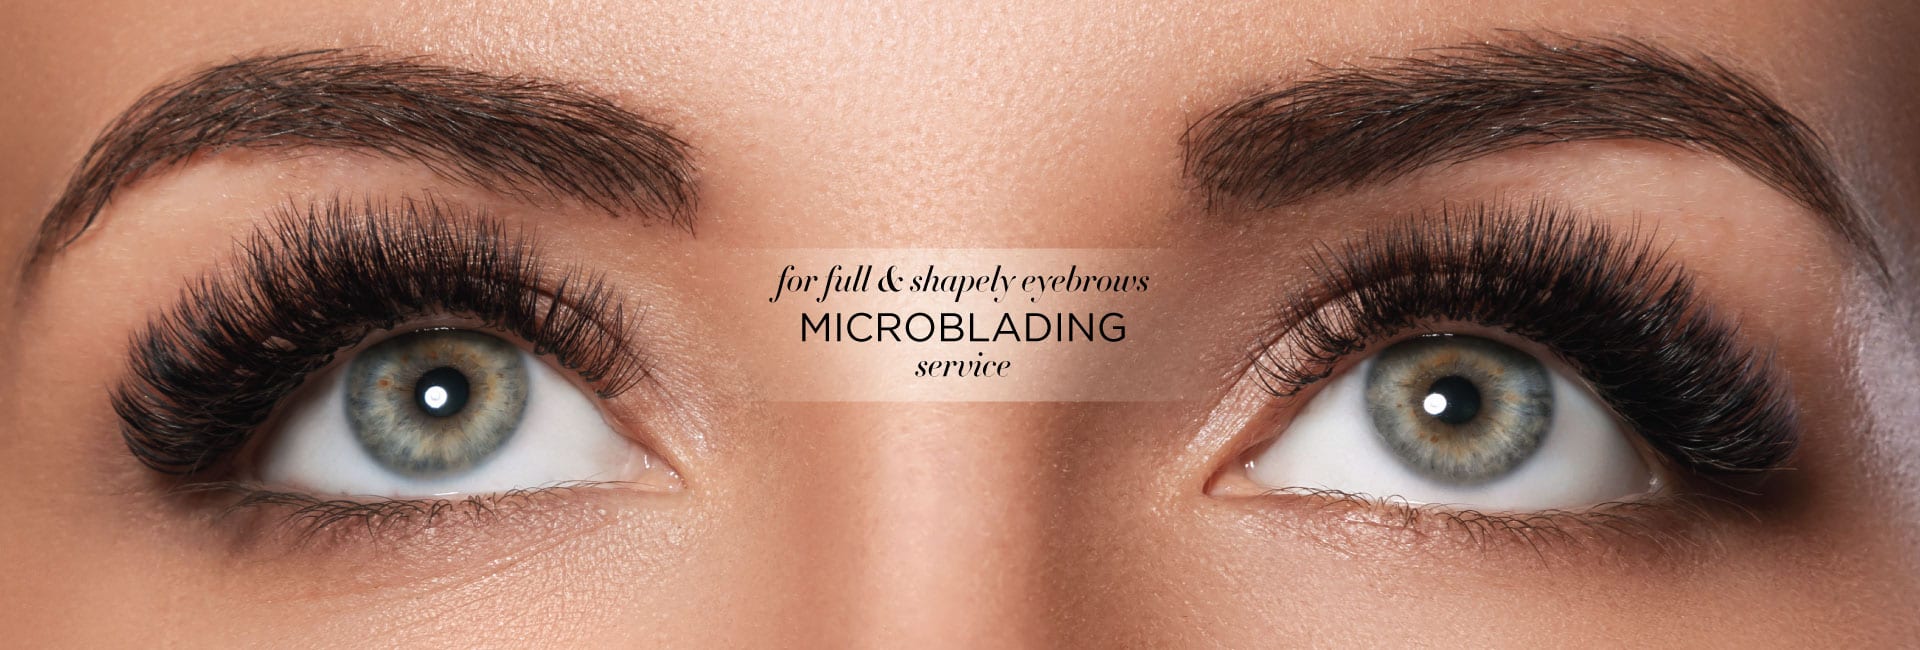 Clinic-Banner_Microblading_v2